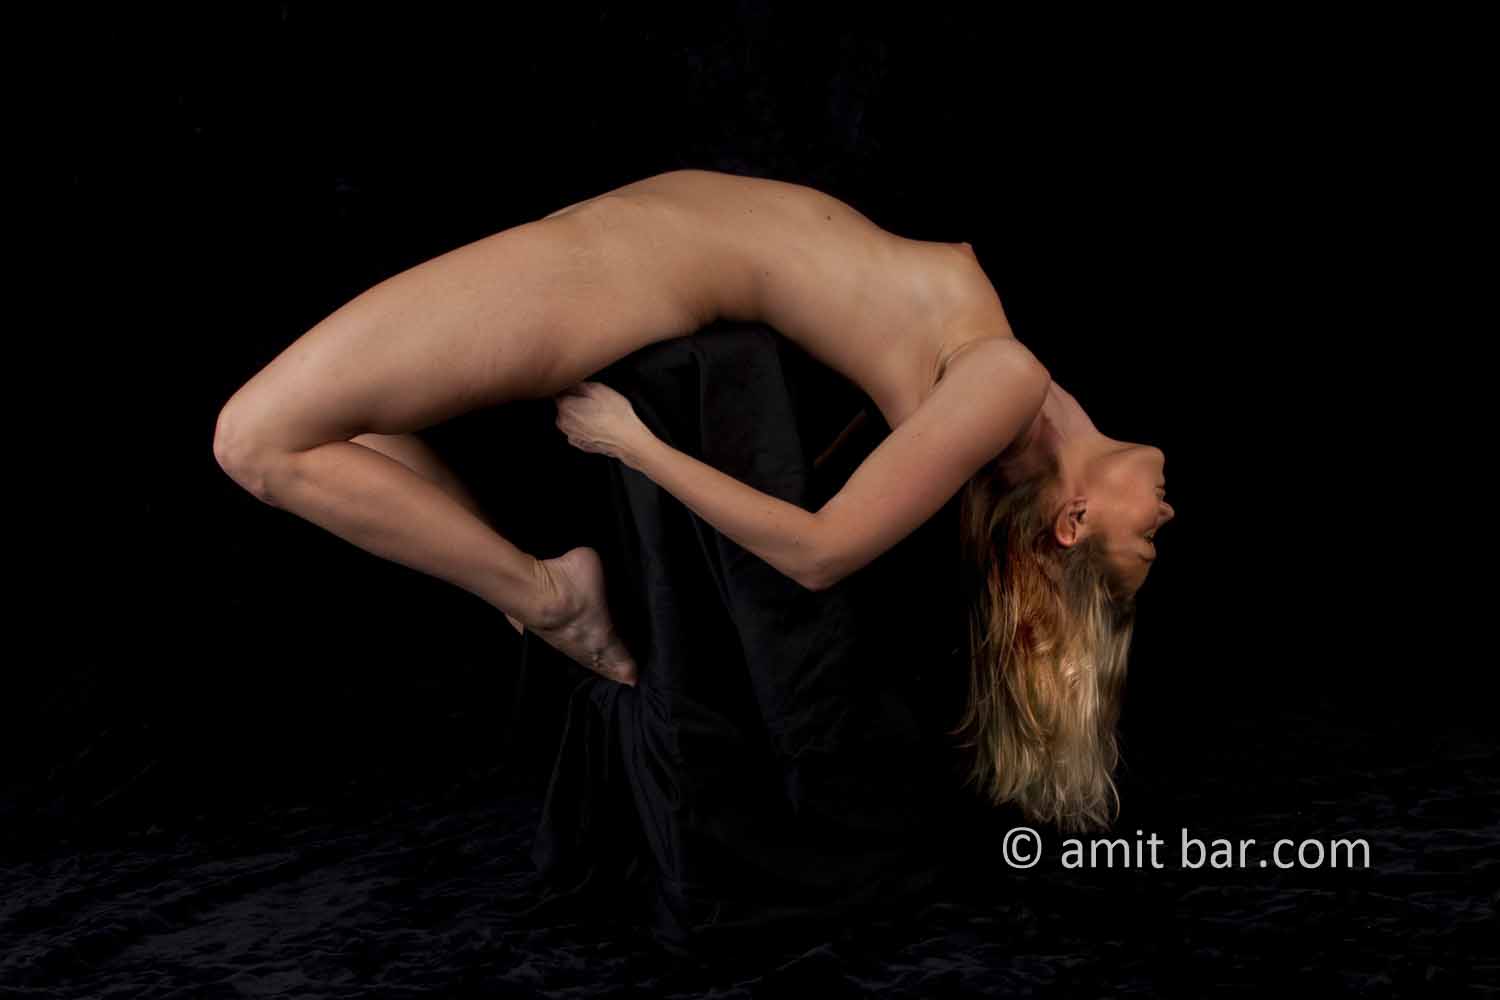 Streched II: Nude model on a high stool